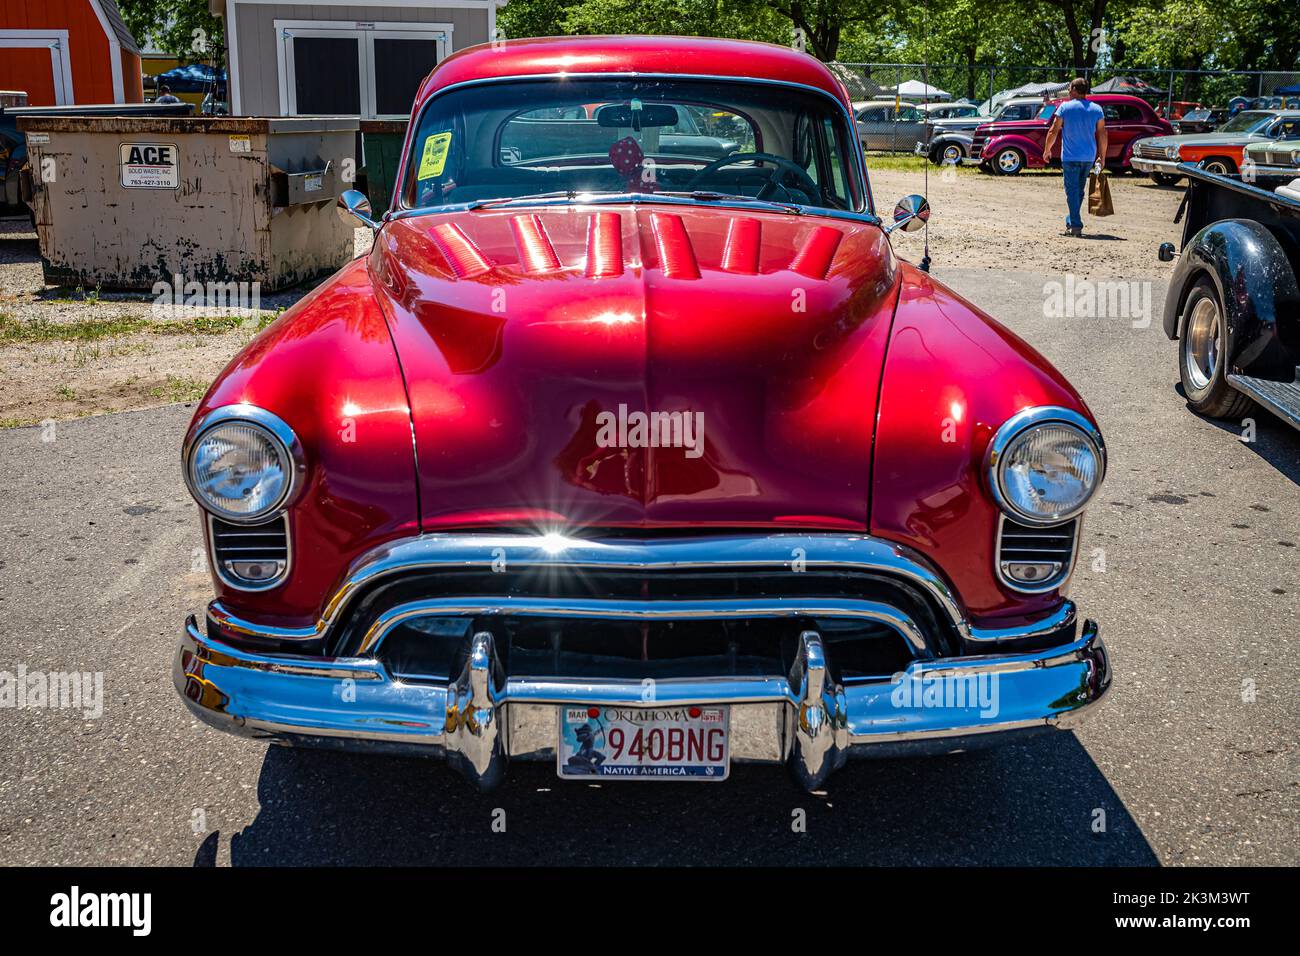 Falcon Heights, MN - June 18, 2022: High perspective front view of a 1949 Oldsmobile Rocket 88 Coupe at a local car show. Stock Photo